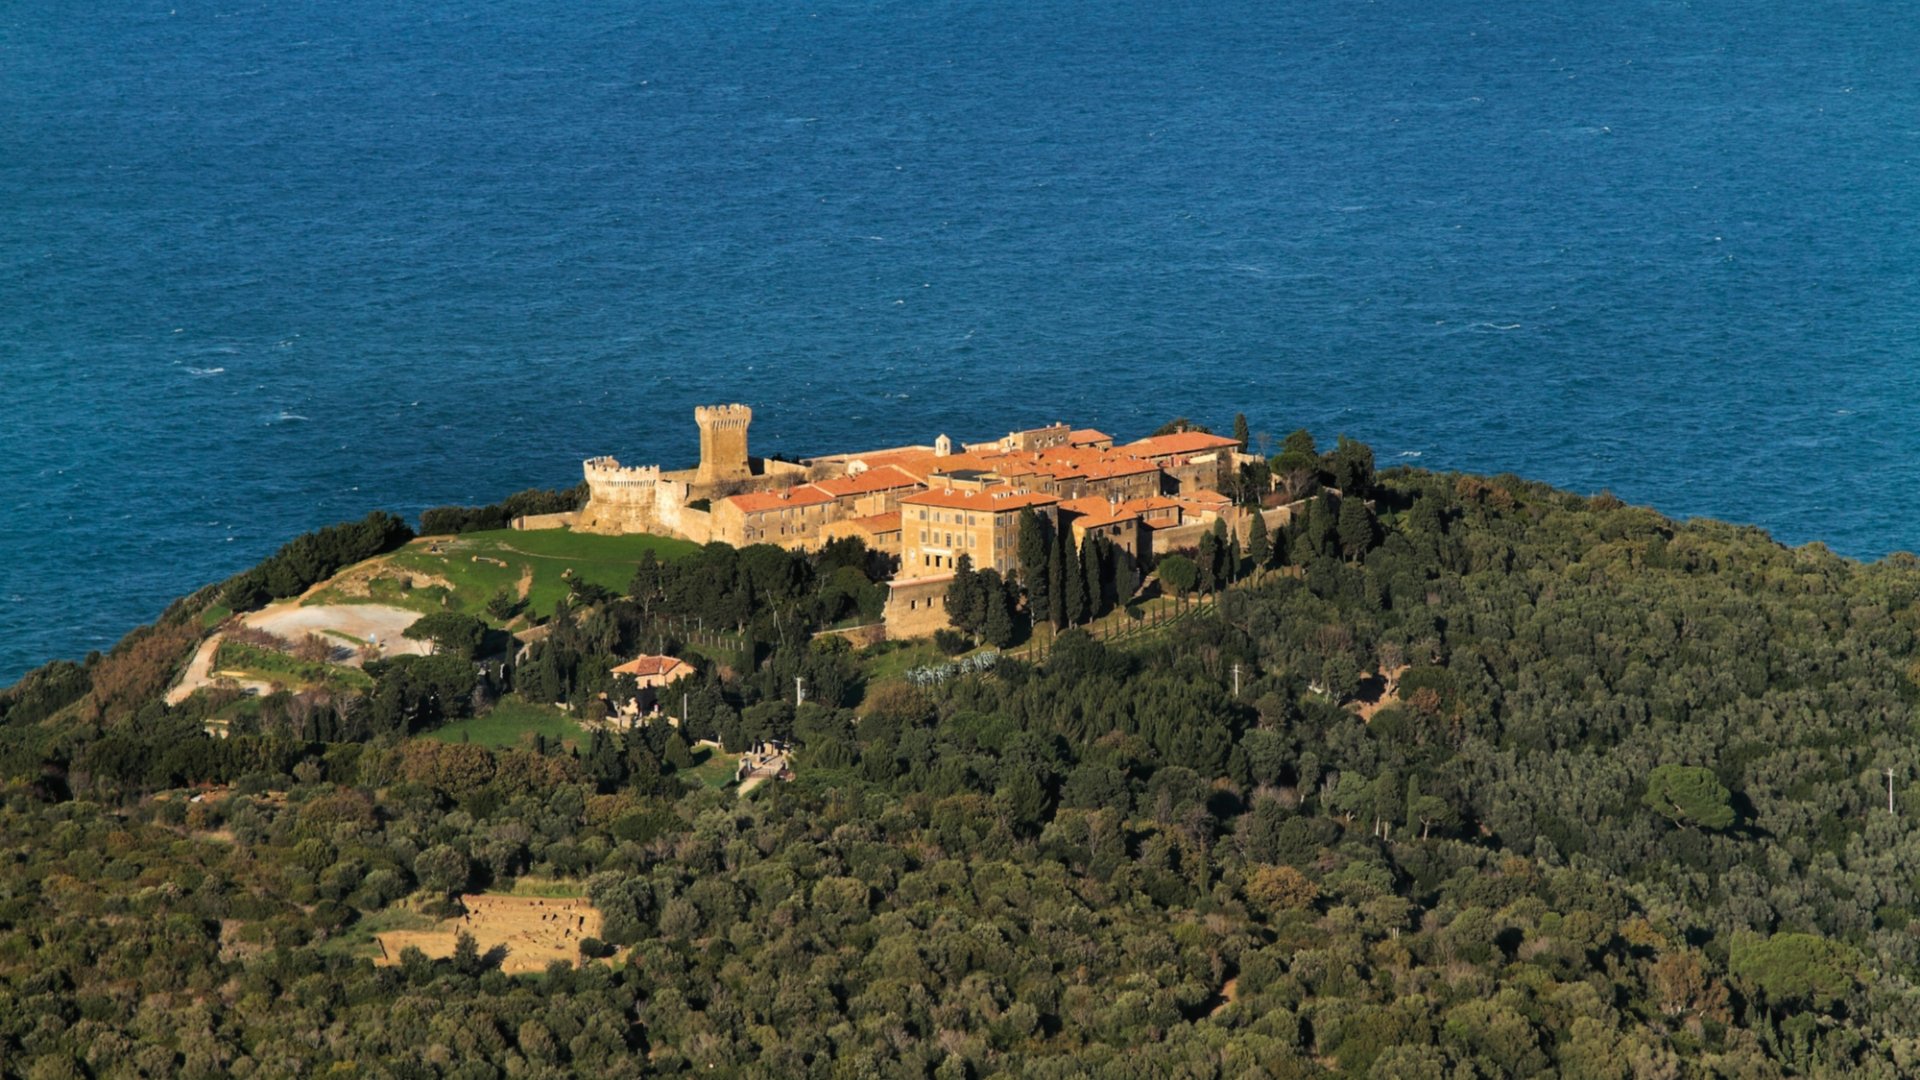 View of Populonia